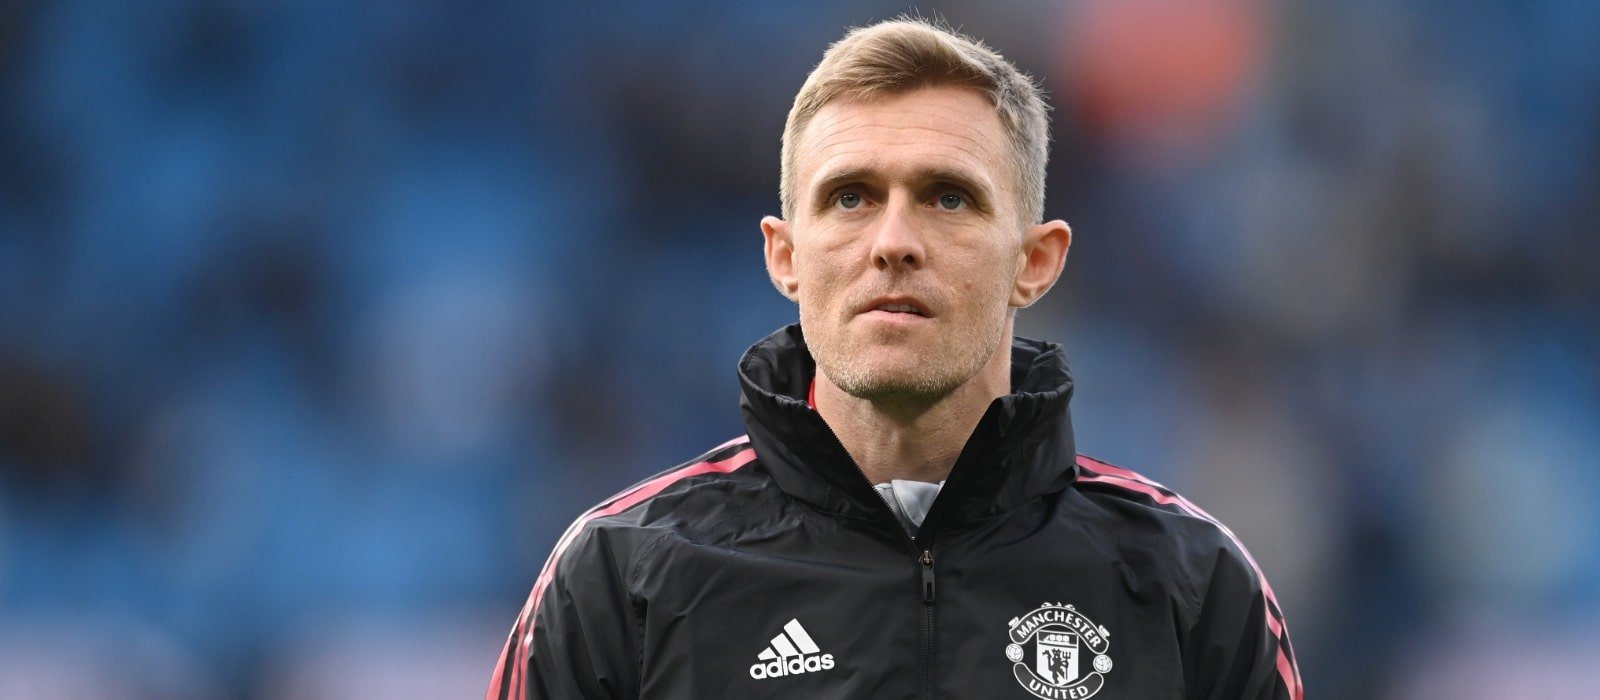 Man United’s technical director Darren Fletcher gives insight into the club’s loan process – Man United News And Transfer News